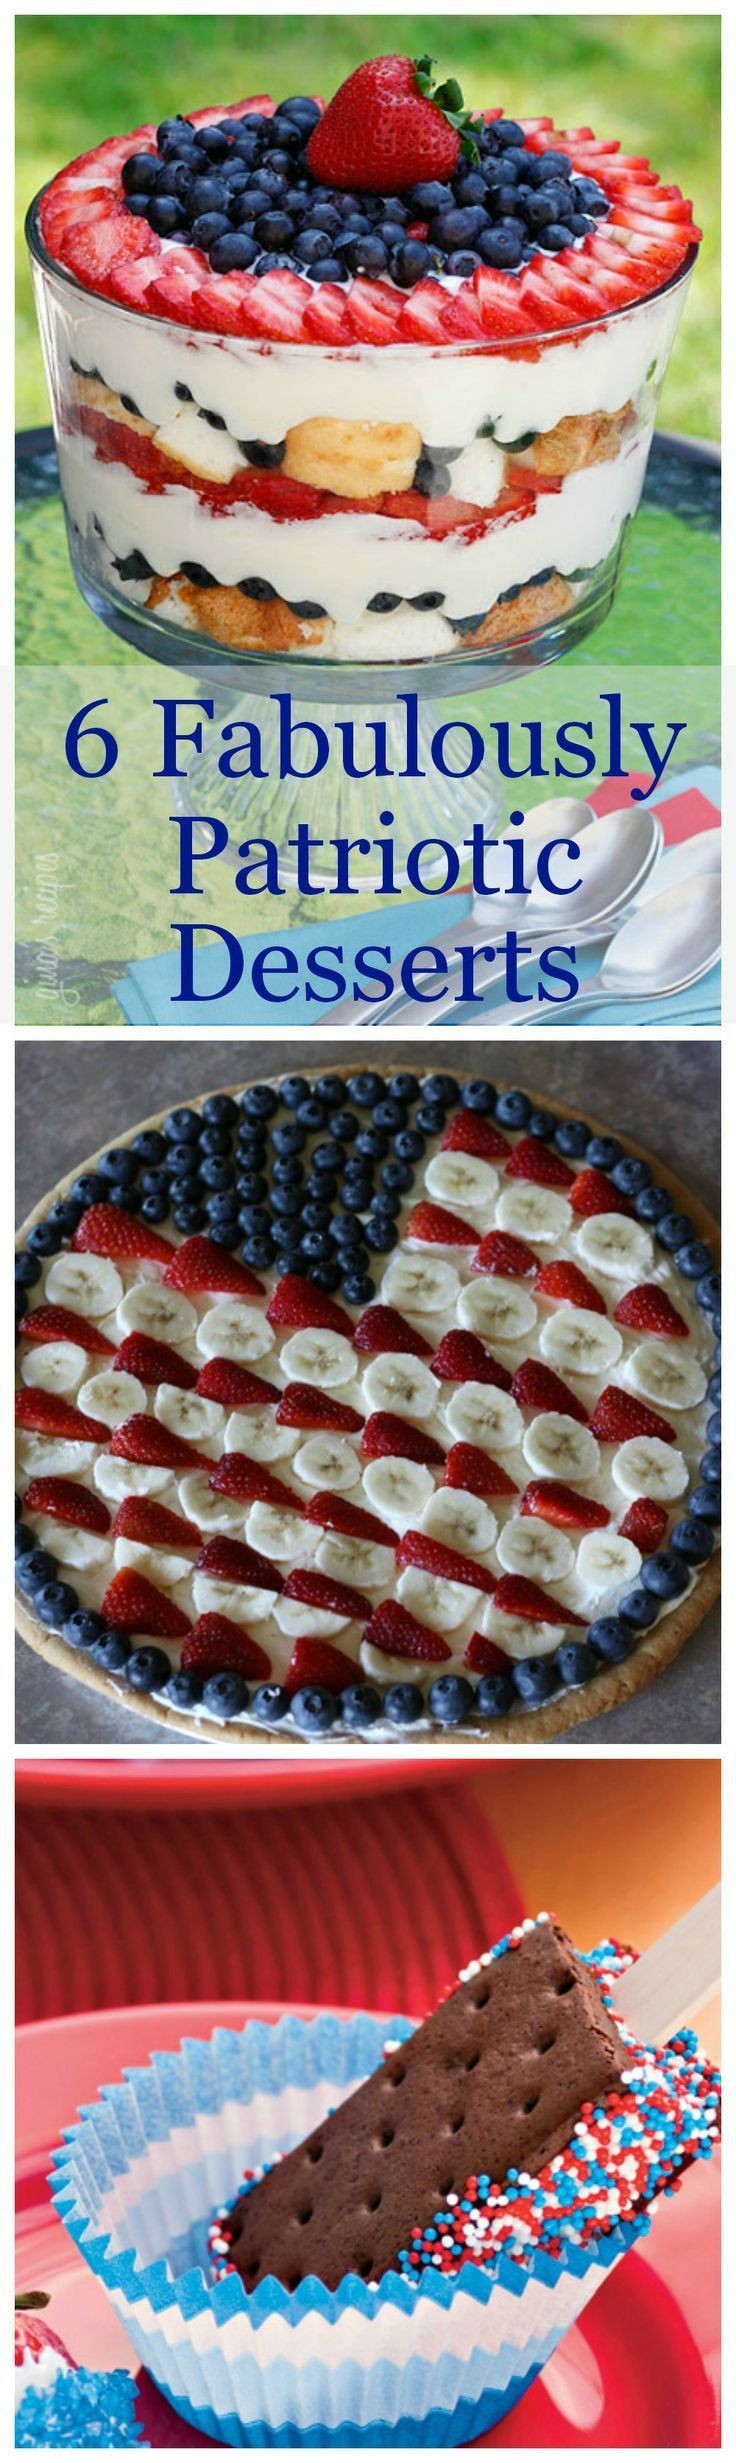 July 4Th Desserts
 10 best images about 4th of July on Pinterest